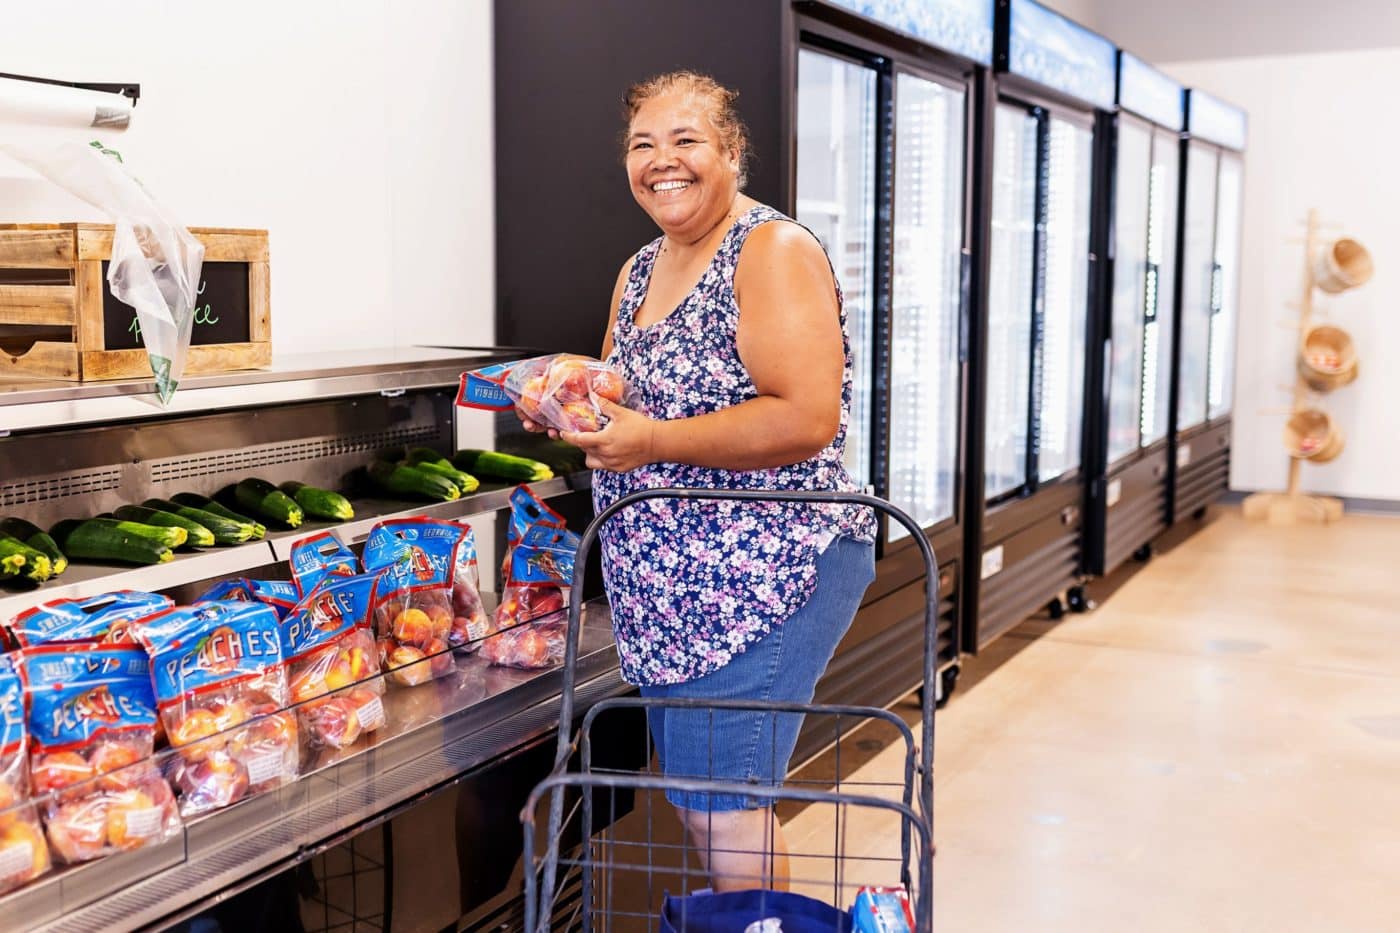 Woman smiling at grocery store holding bag of peaches.